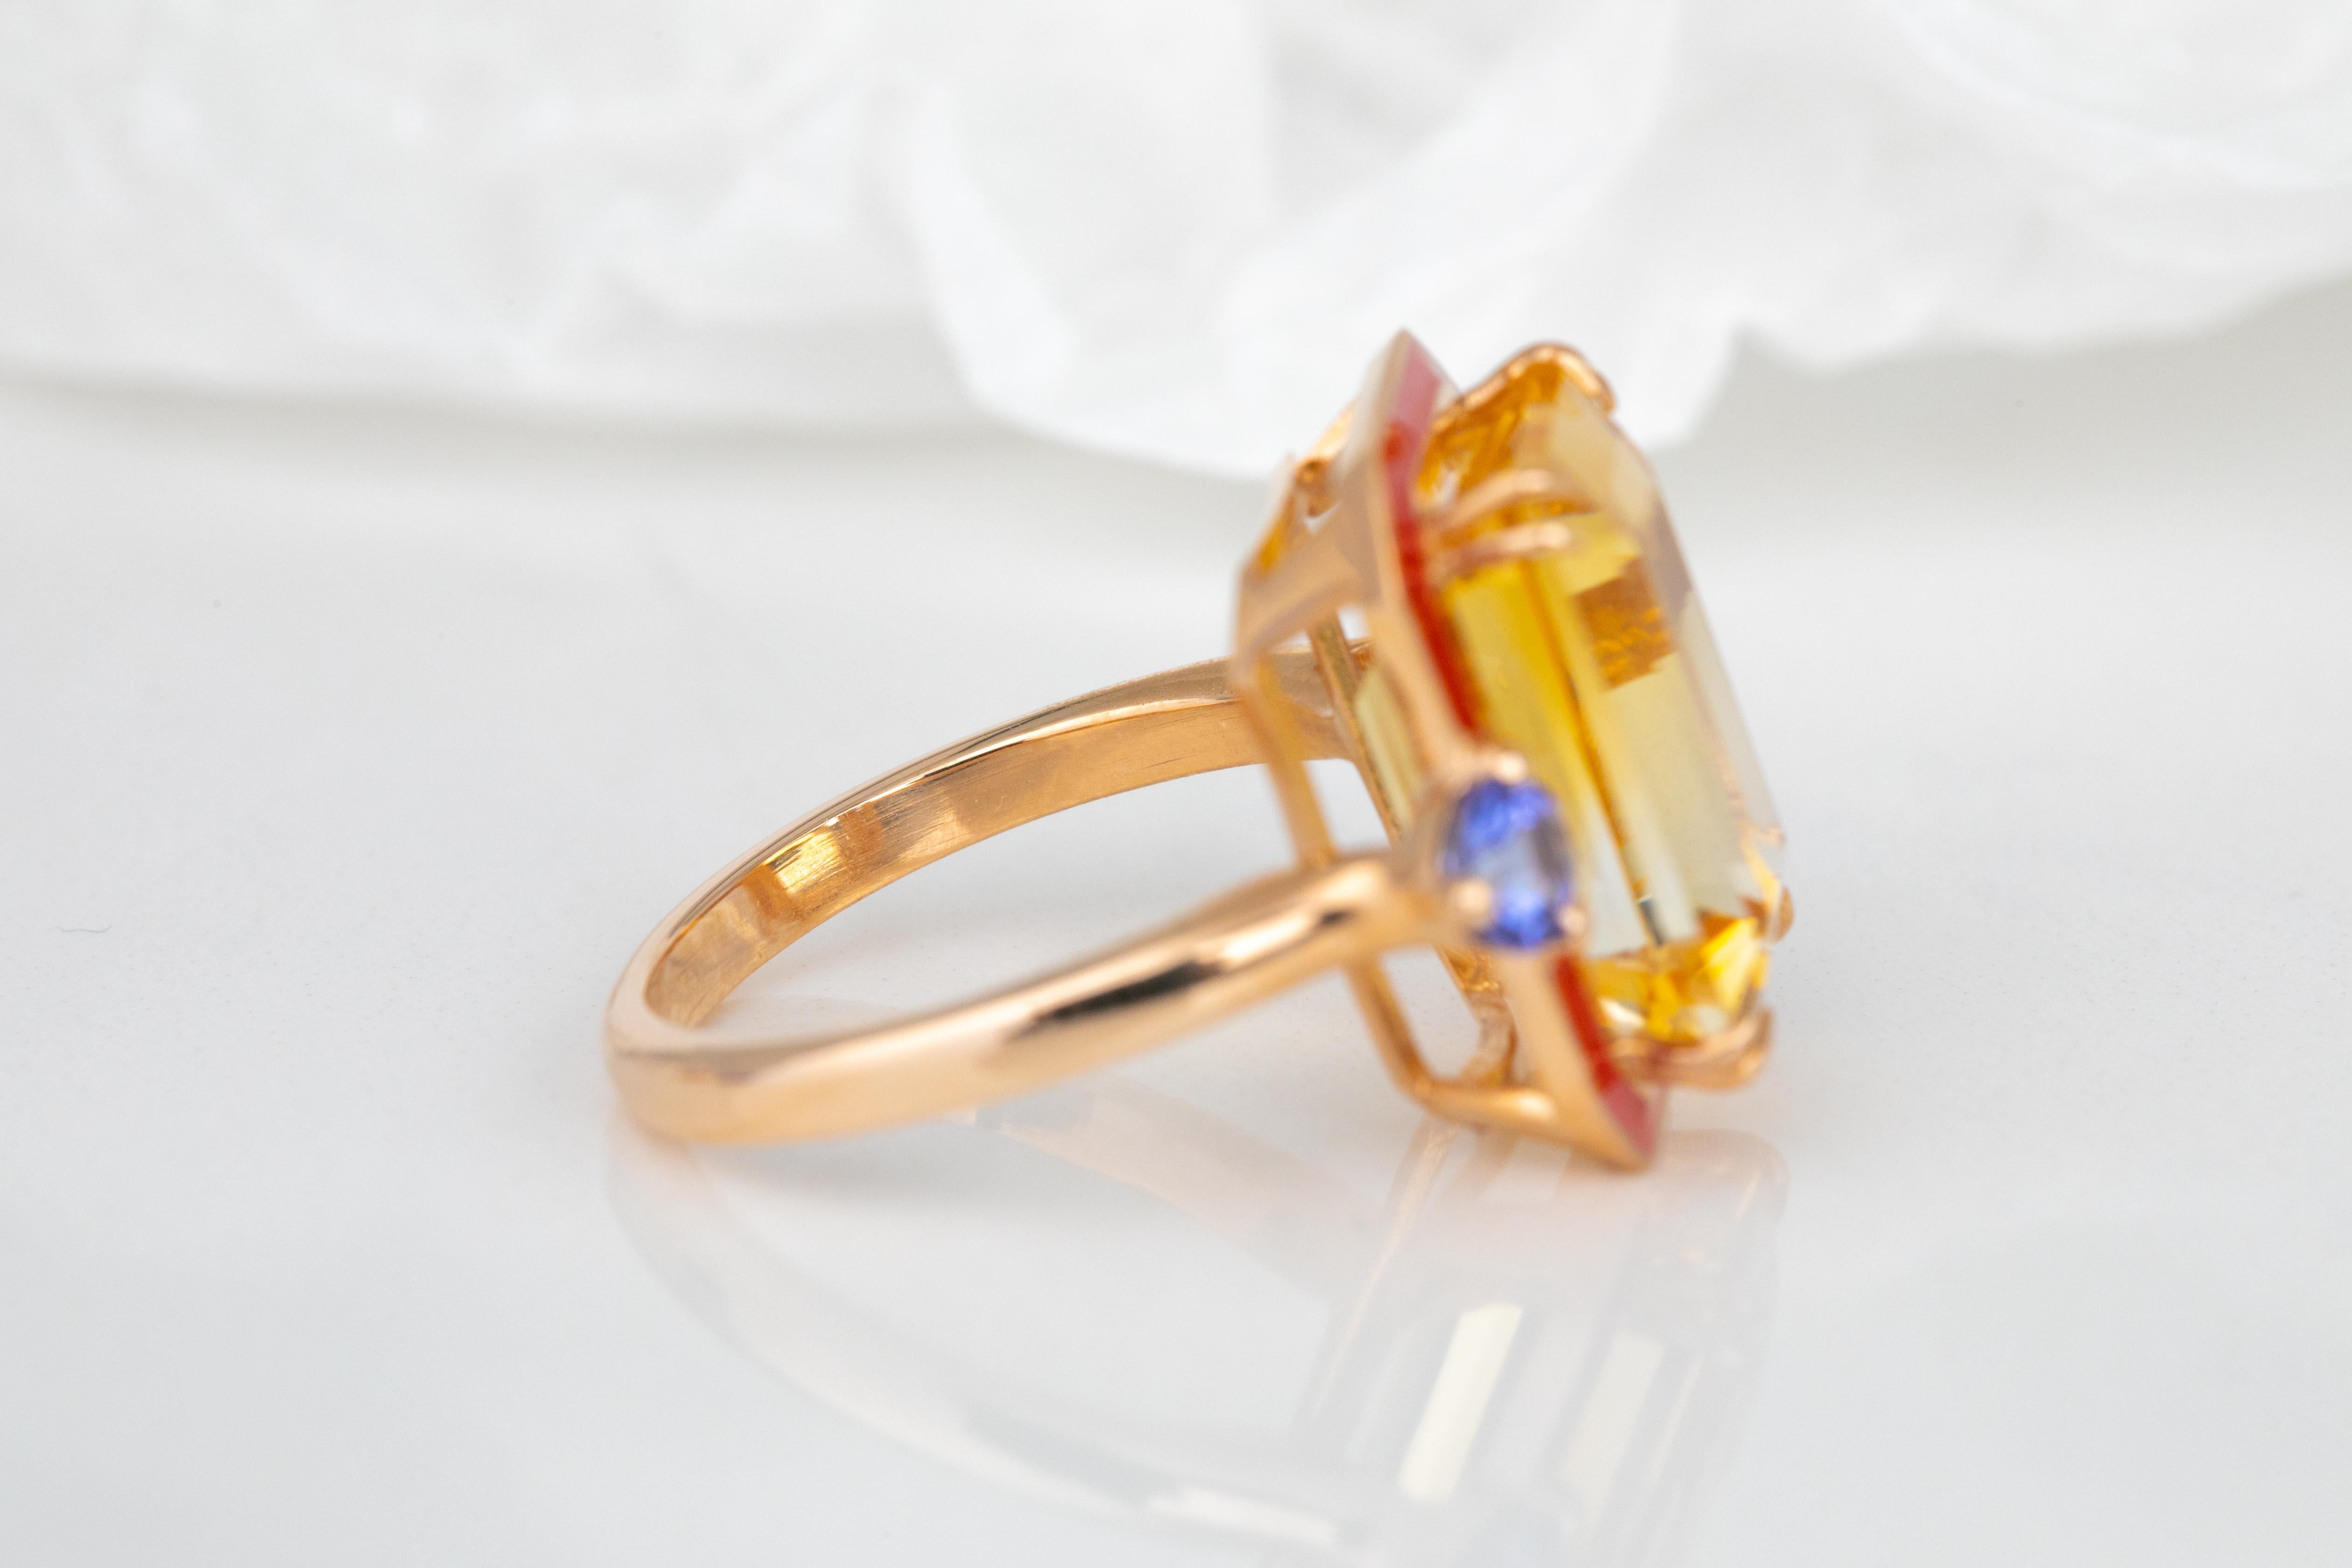 For Sale:  Art Deco 14k Solid Gold, 6.43ct, Citrine and 0.40ct, Ceylon Sapphire Stone Ring 3